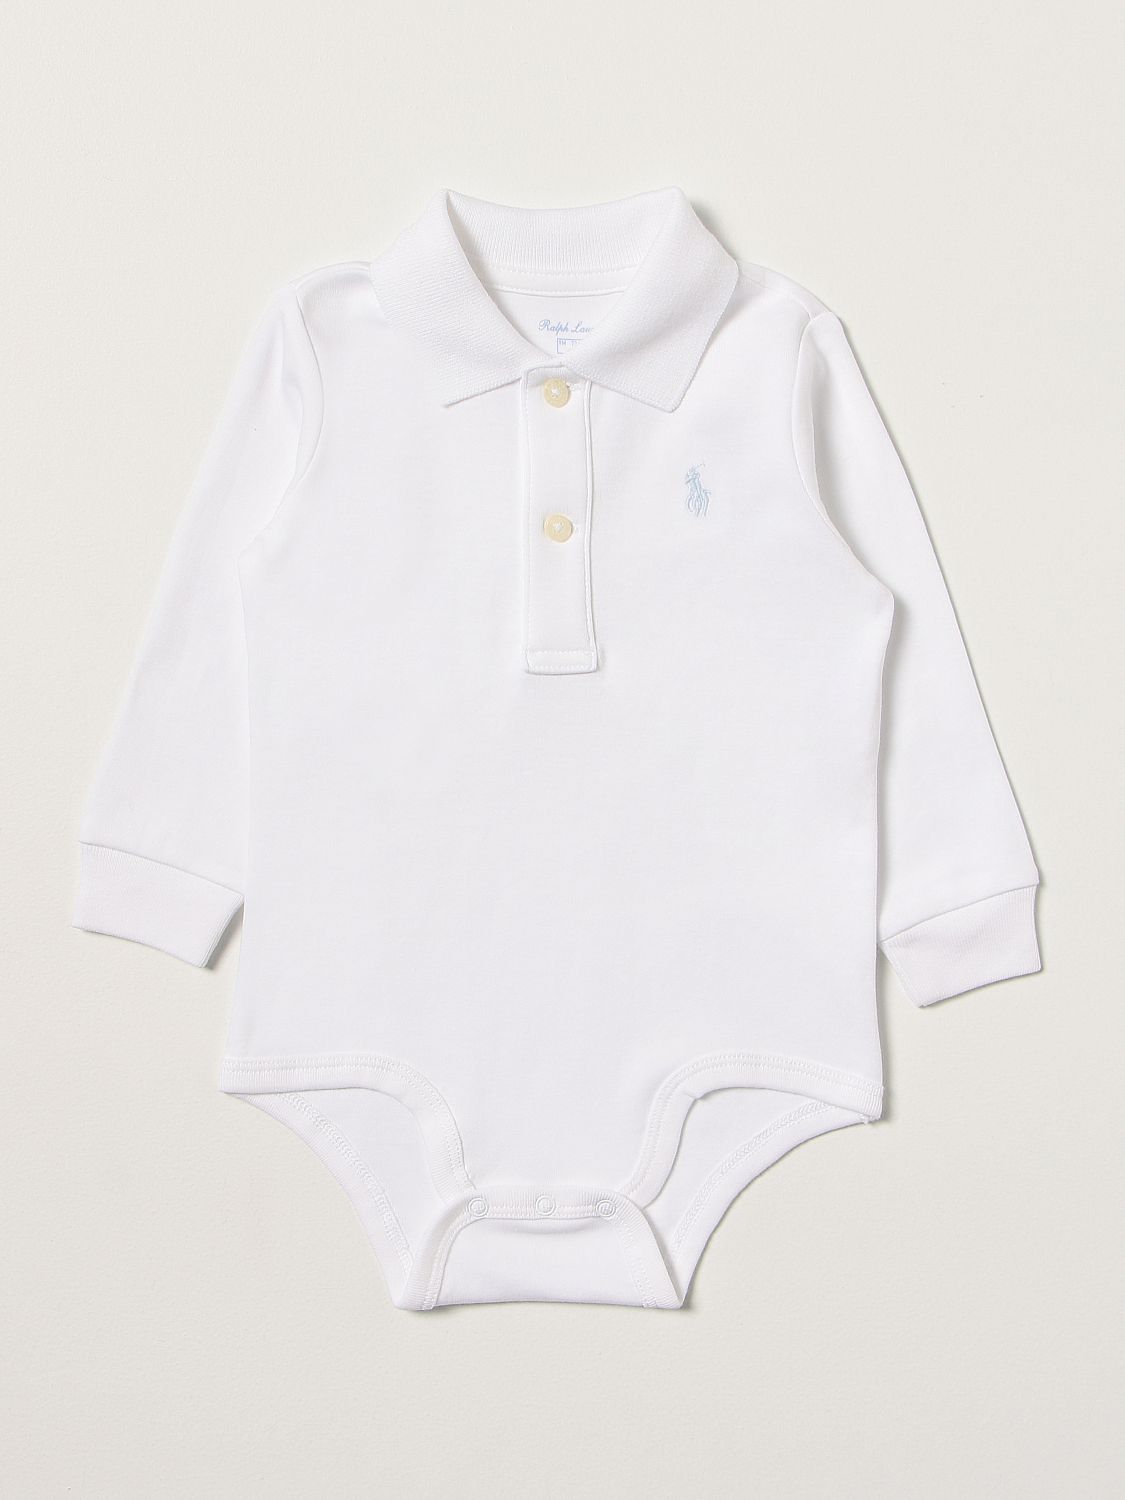 POLO RALPH LAUREN: body in cotton with logo - White | Polo Ralph Lauren bodysuit 320799699 on GIGLIO.COM